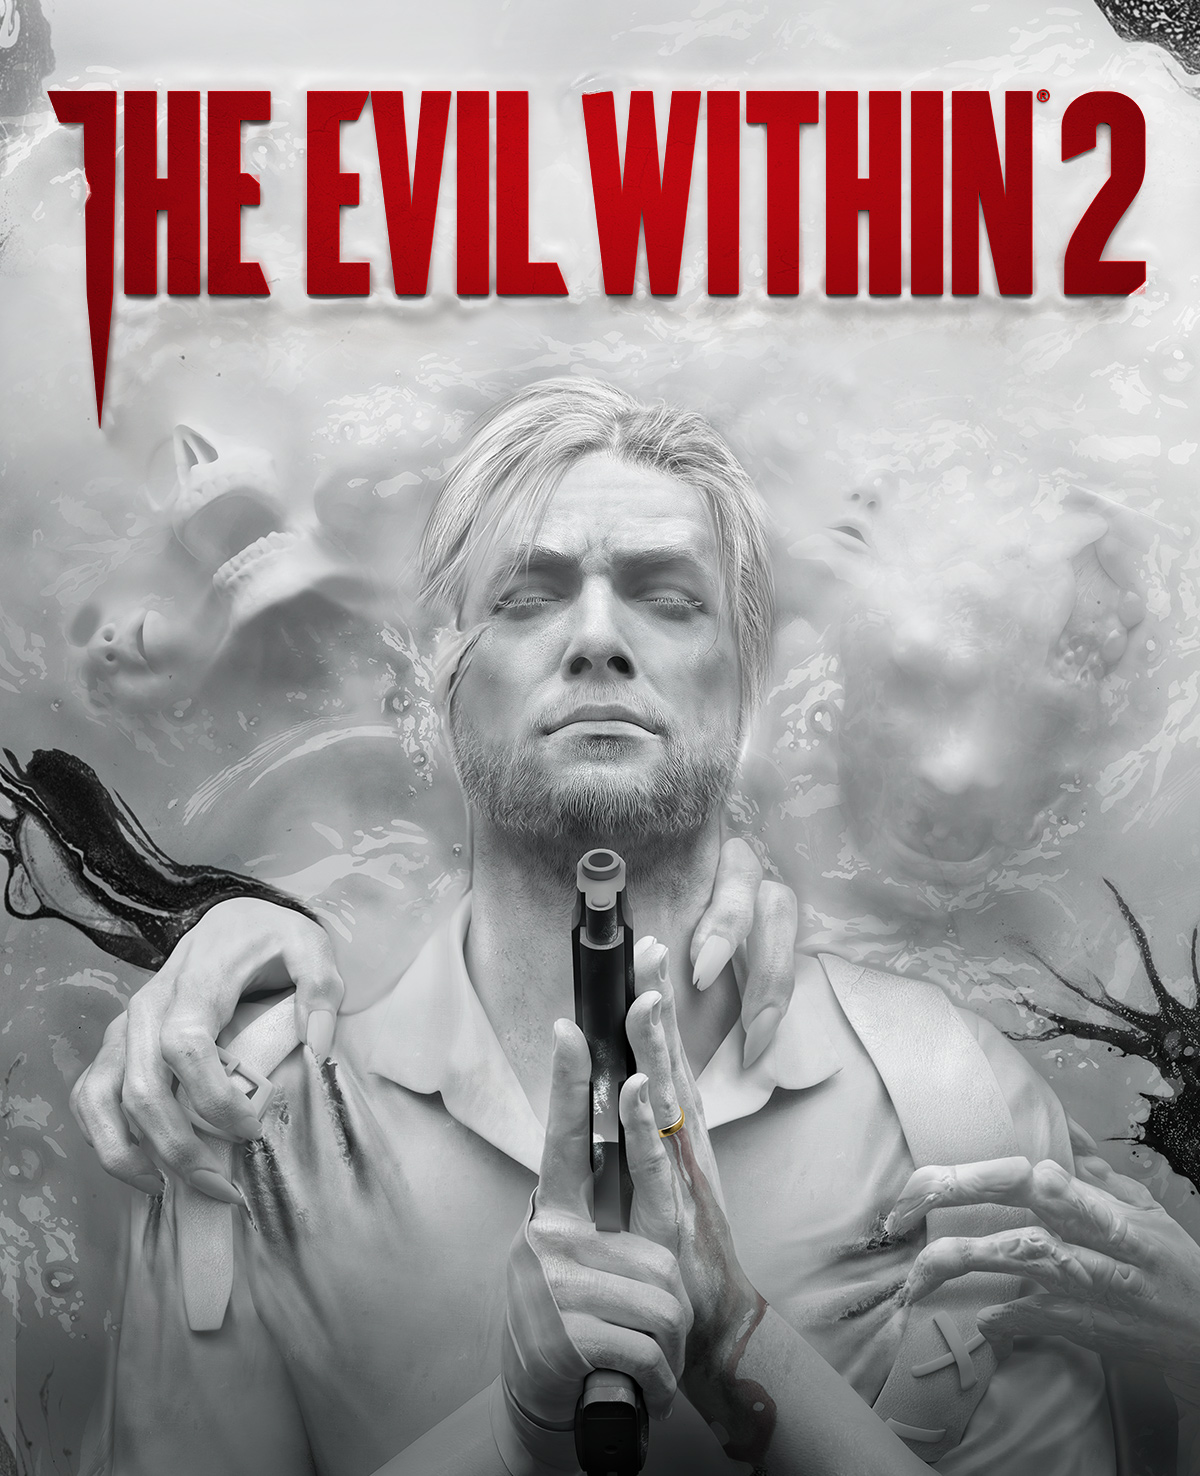 Evil Within 2 drops this Friday the 13th